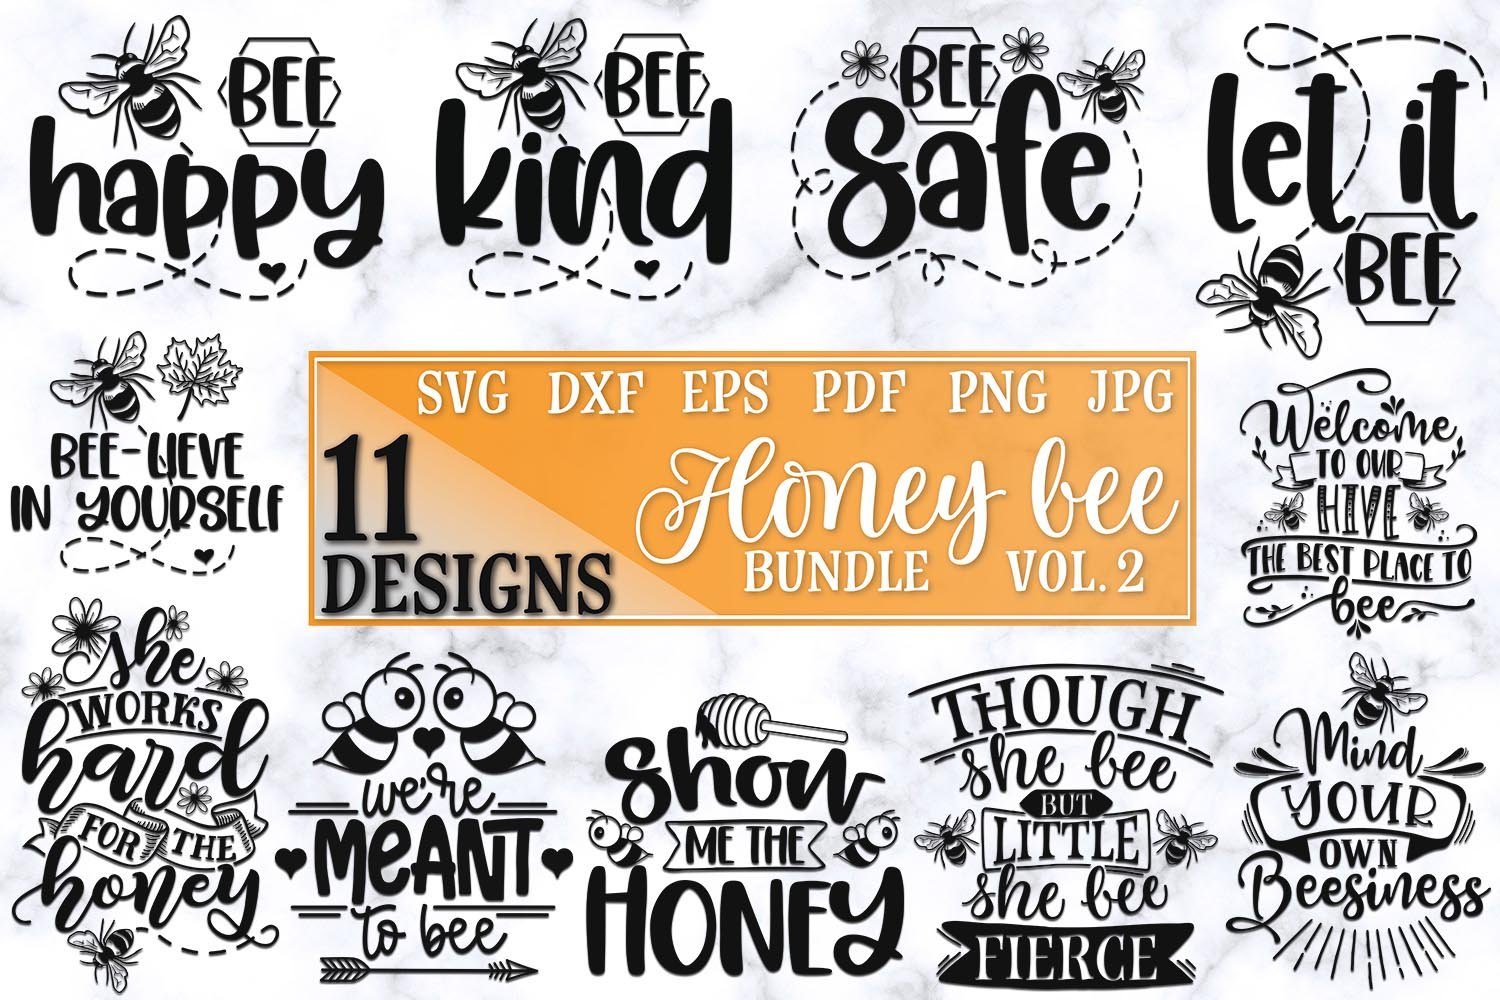 Download Honey Bee Bundle Vol 2 Of 11 Designs Svg Files For Cutting Machines Cricut Silhouette Sublimation Designs Bee Pun Svg Bee Happy Bee Kind So Fontsy